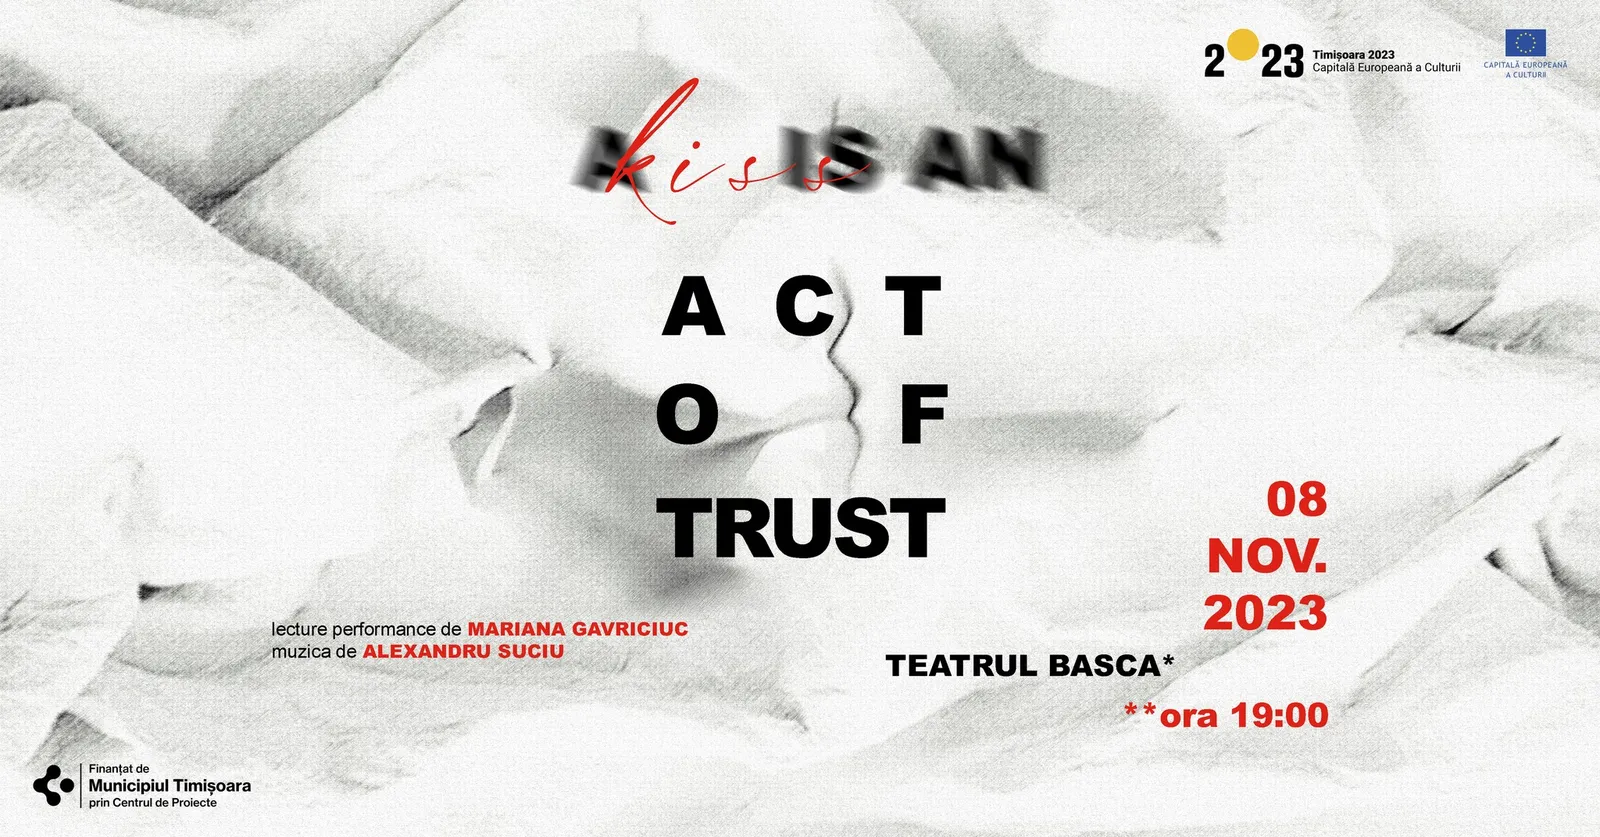 A kiss is an act of trust // Lecture performance de Mariana Gavriciuc